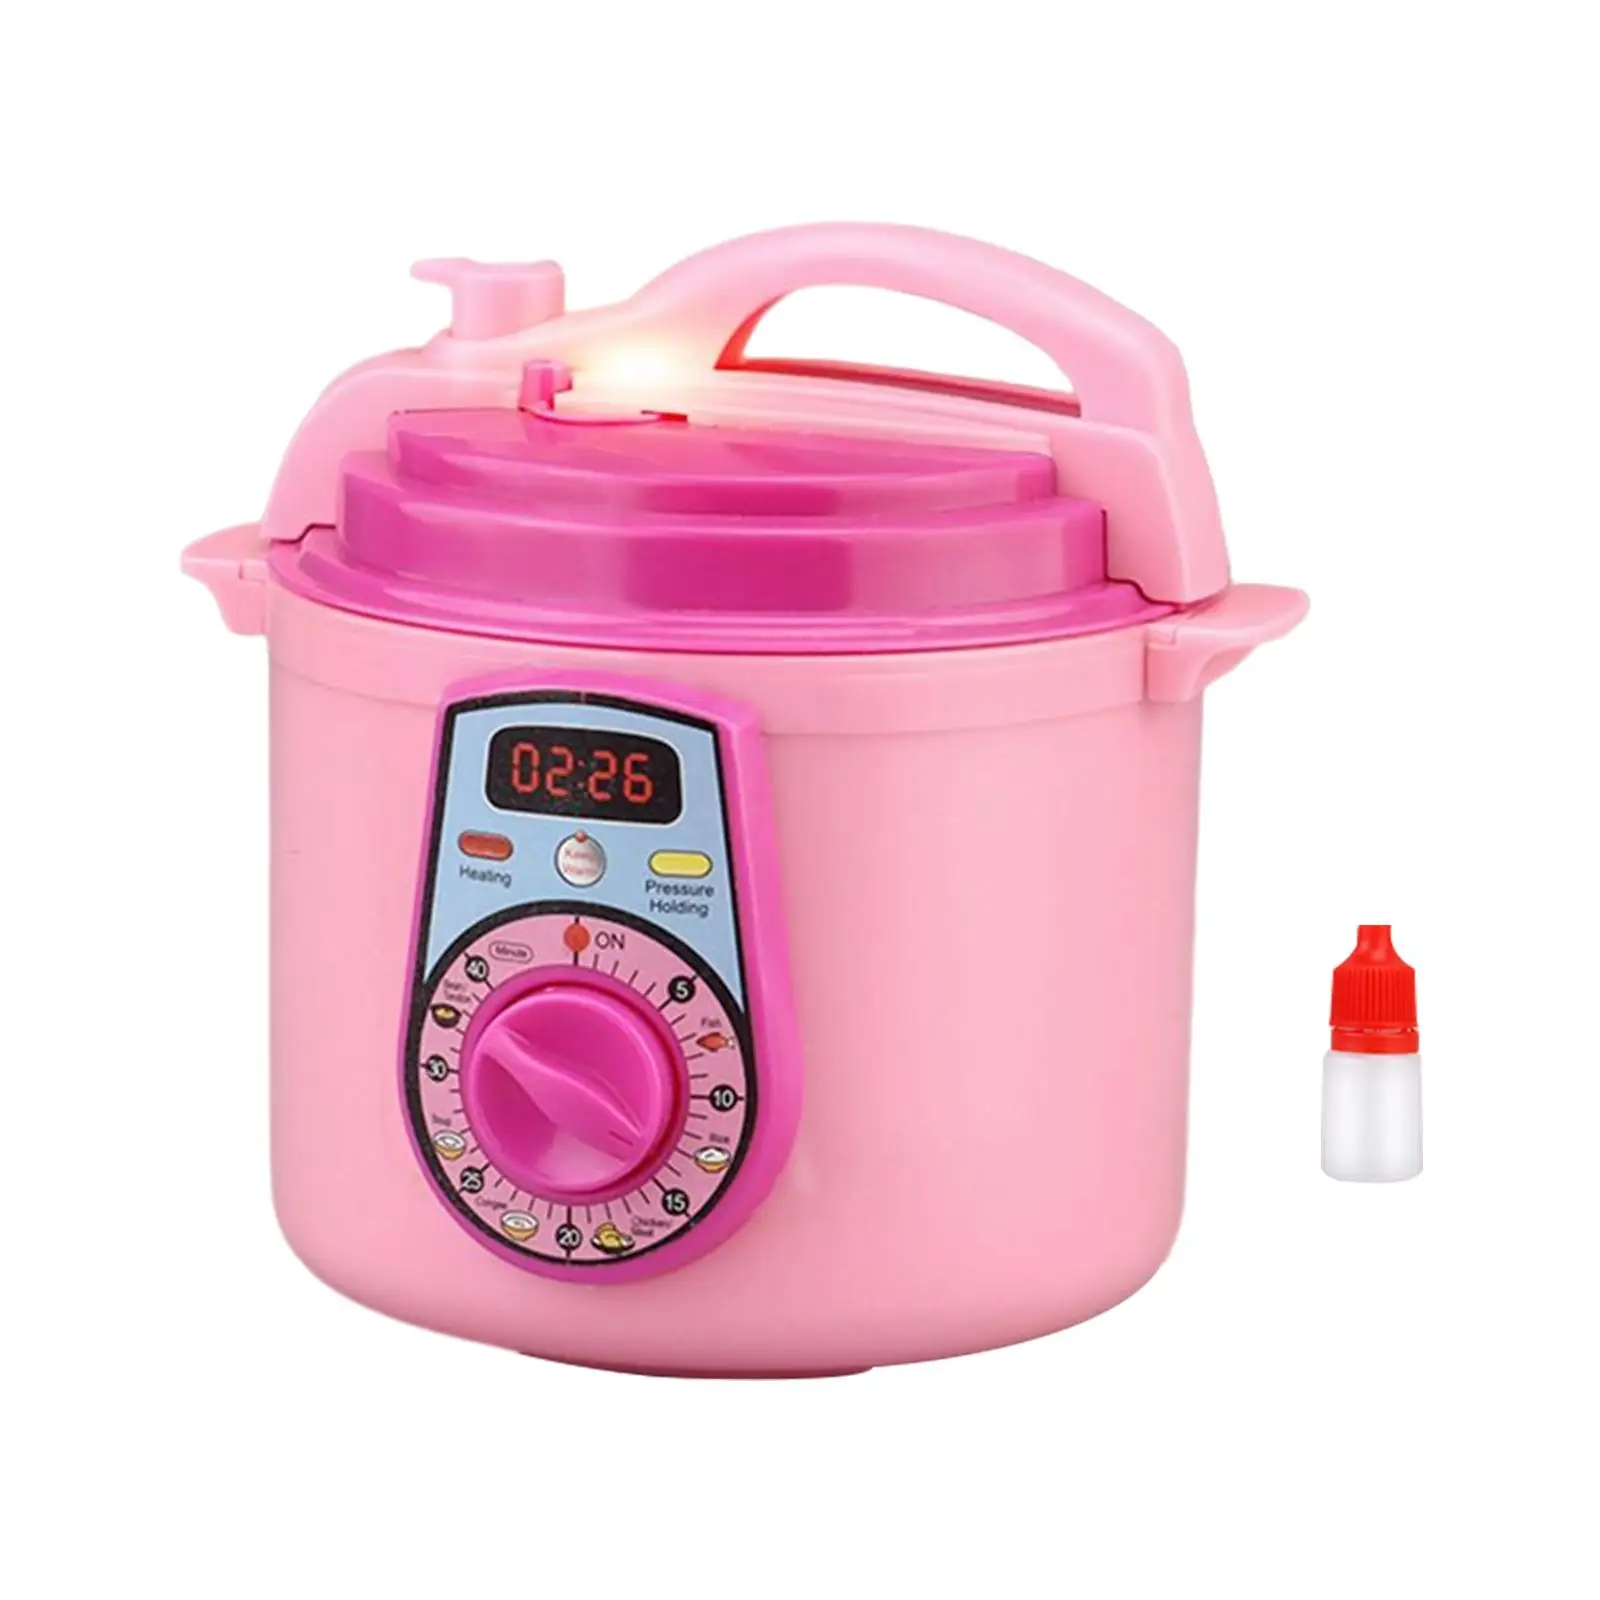 Simulation Electric Rice Cooker Toy with Lights Sound for Children